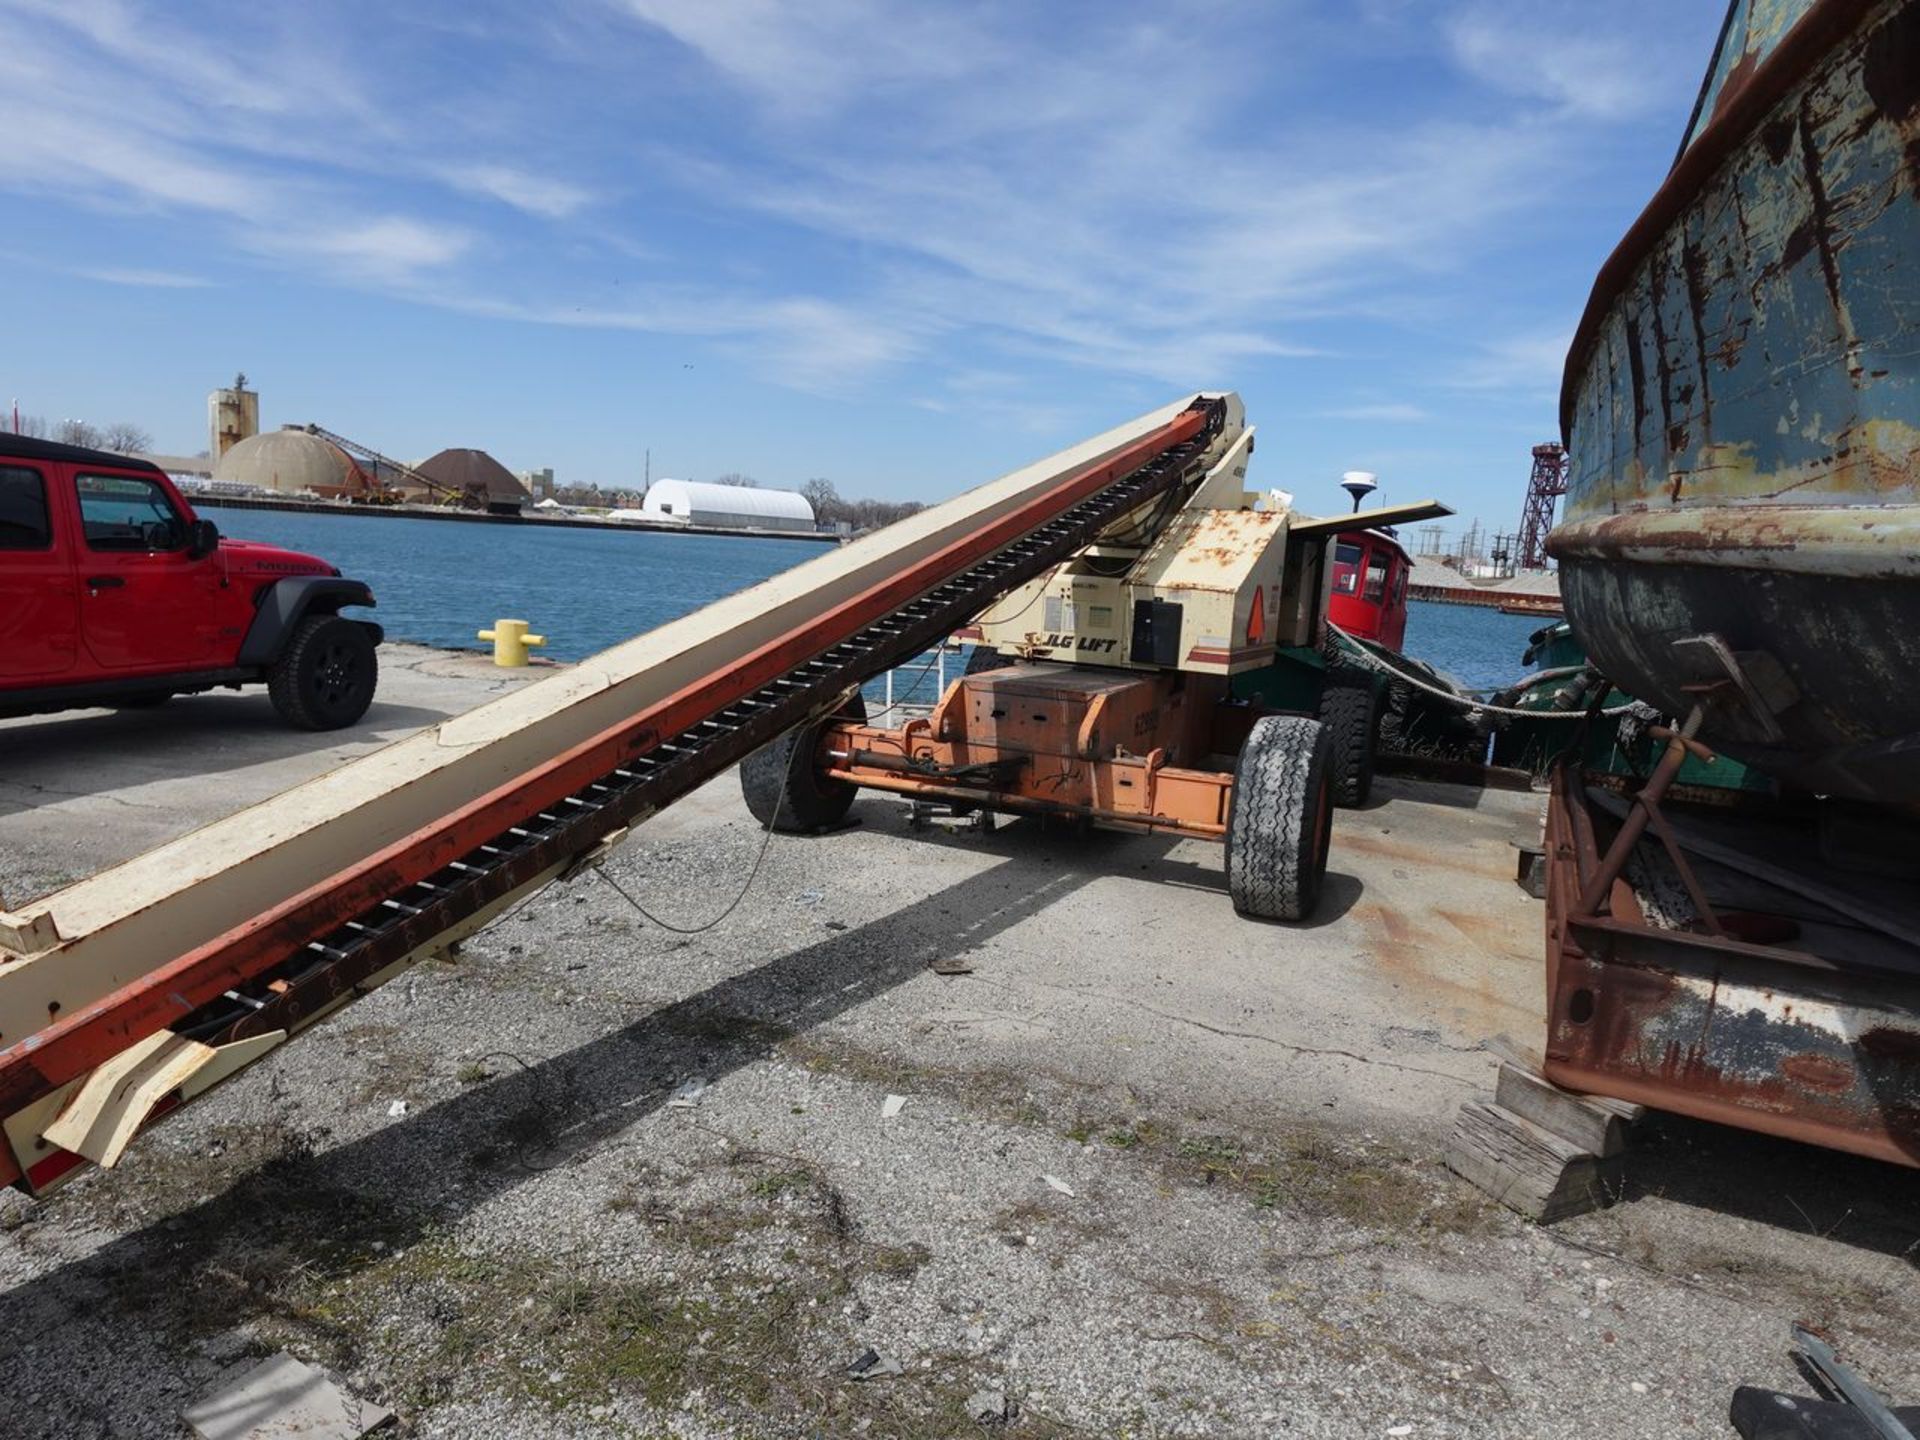 JLG 80 ft. Model 80HX Snorkel Lift, S/N: 020791 0300022103; with 80 ft. Max. Platform Height, 70 ft. - Image 3 of 6